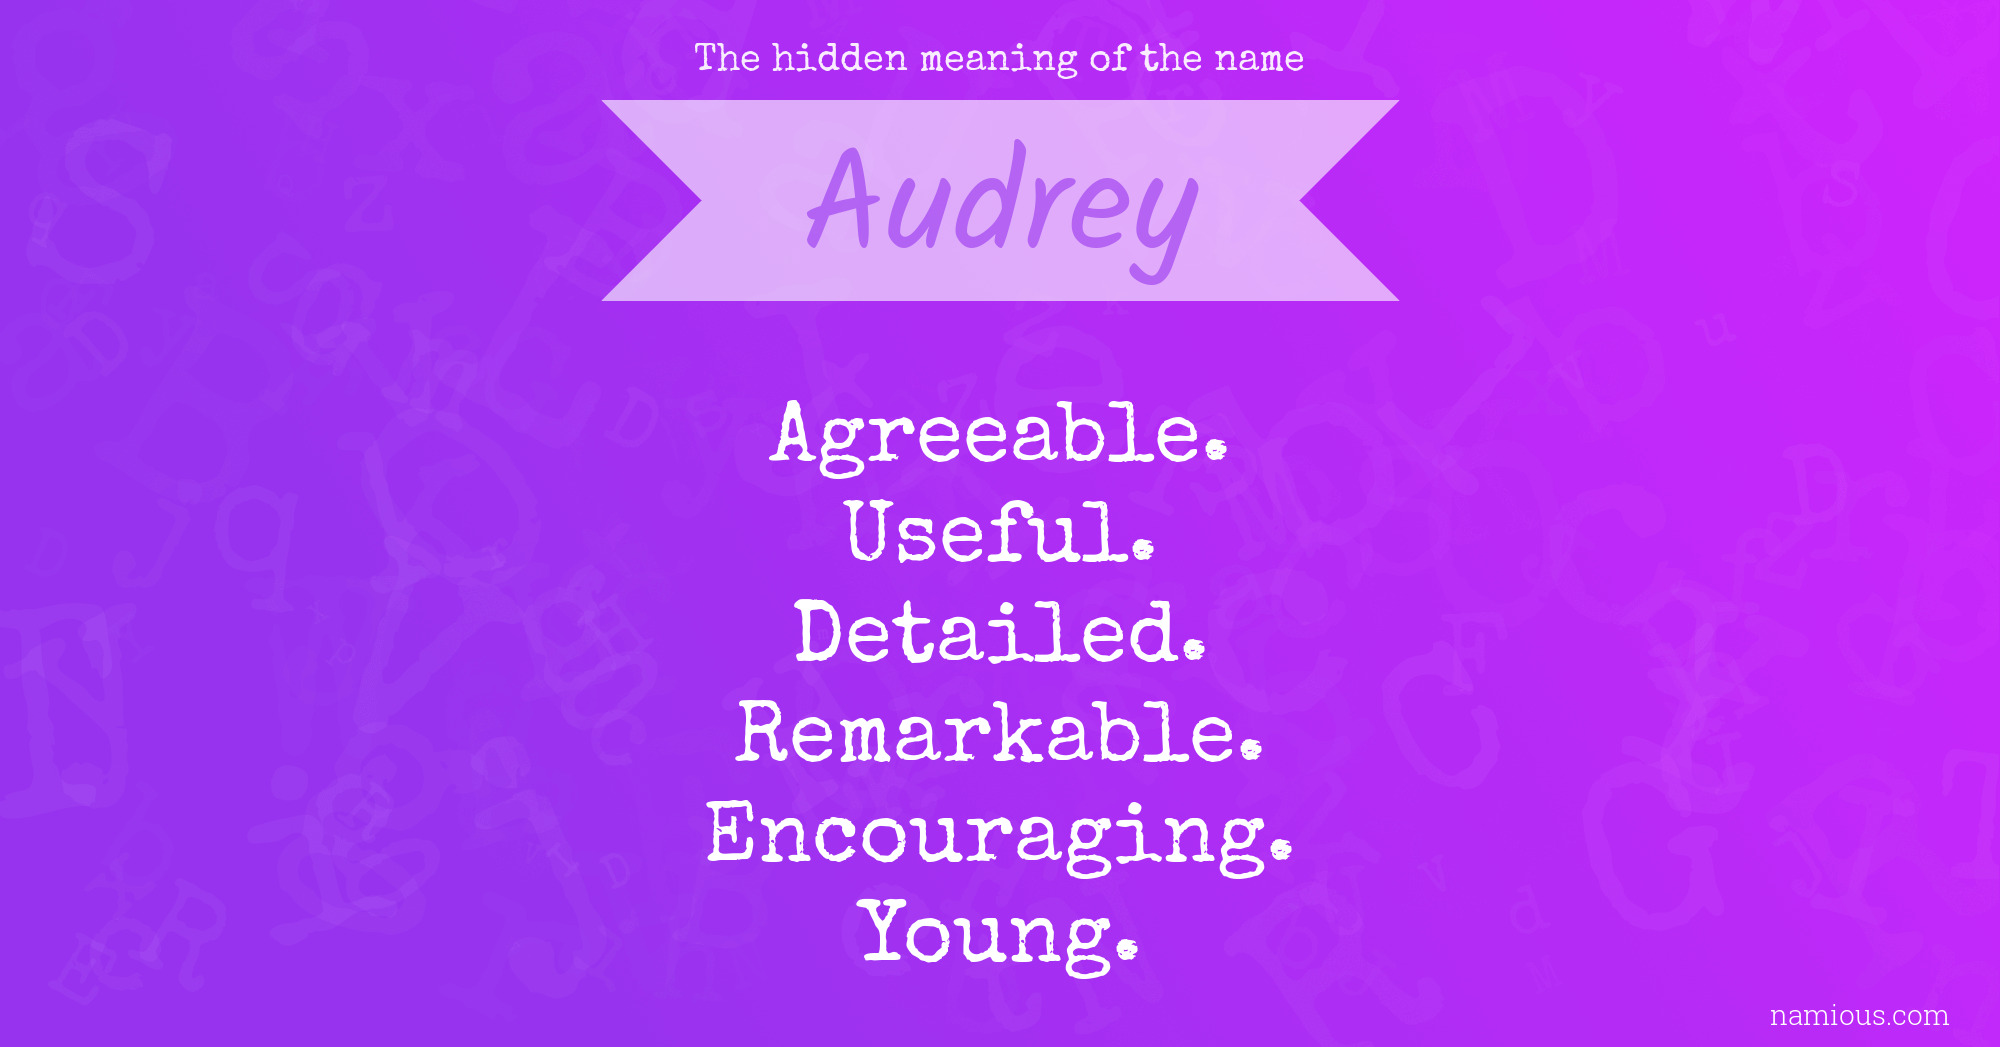 The hidden meaning of the name Audrey